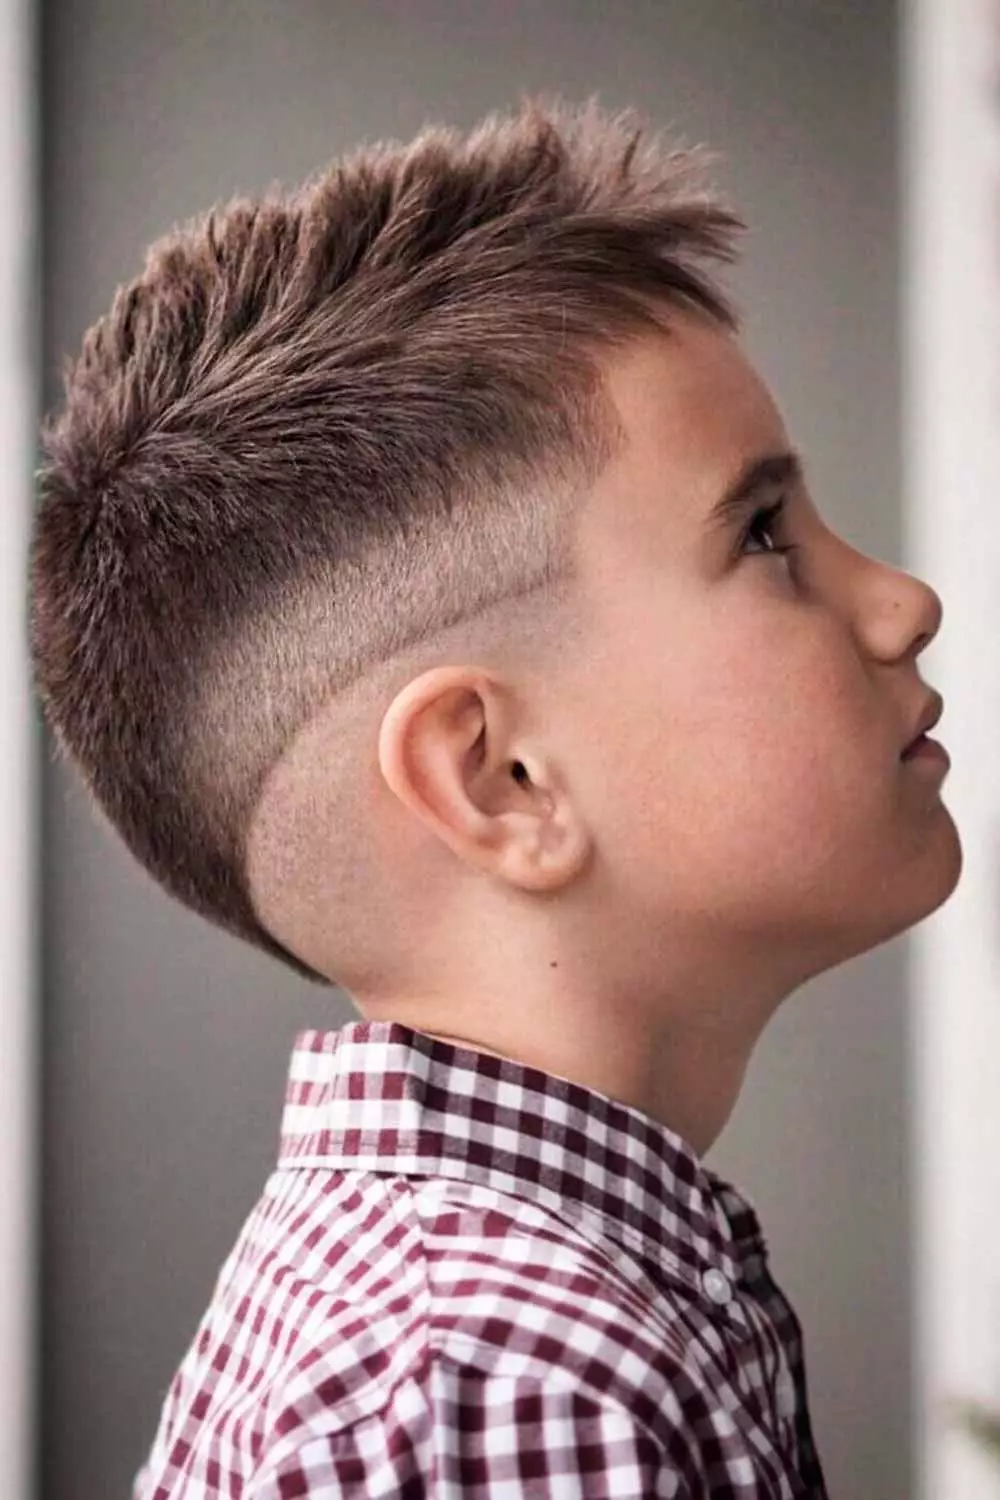 Boys Haircuts - The Ultimate 2020 Inspiration for You! | Hera Hair Beauty